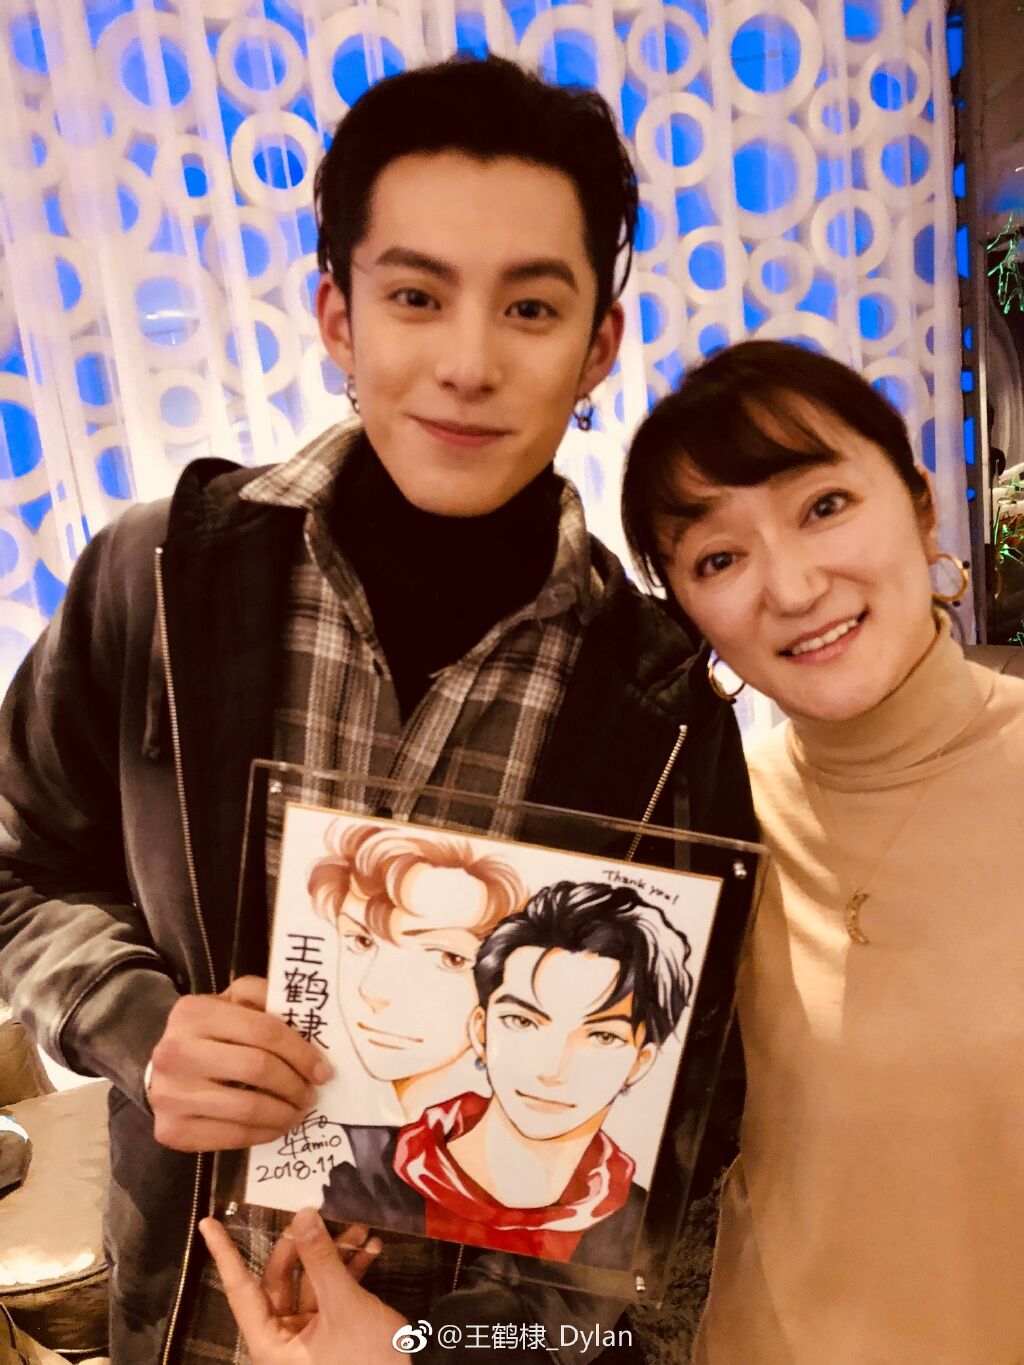 Just discovered Dylan Wang last week from Meteor Garden and LBFAD